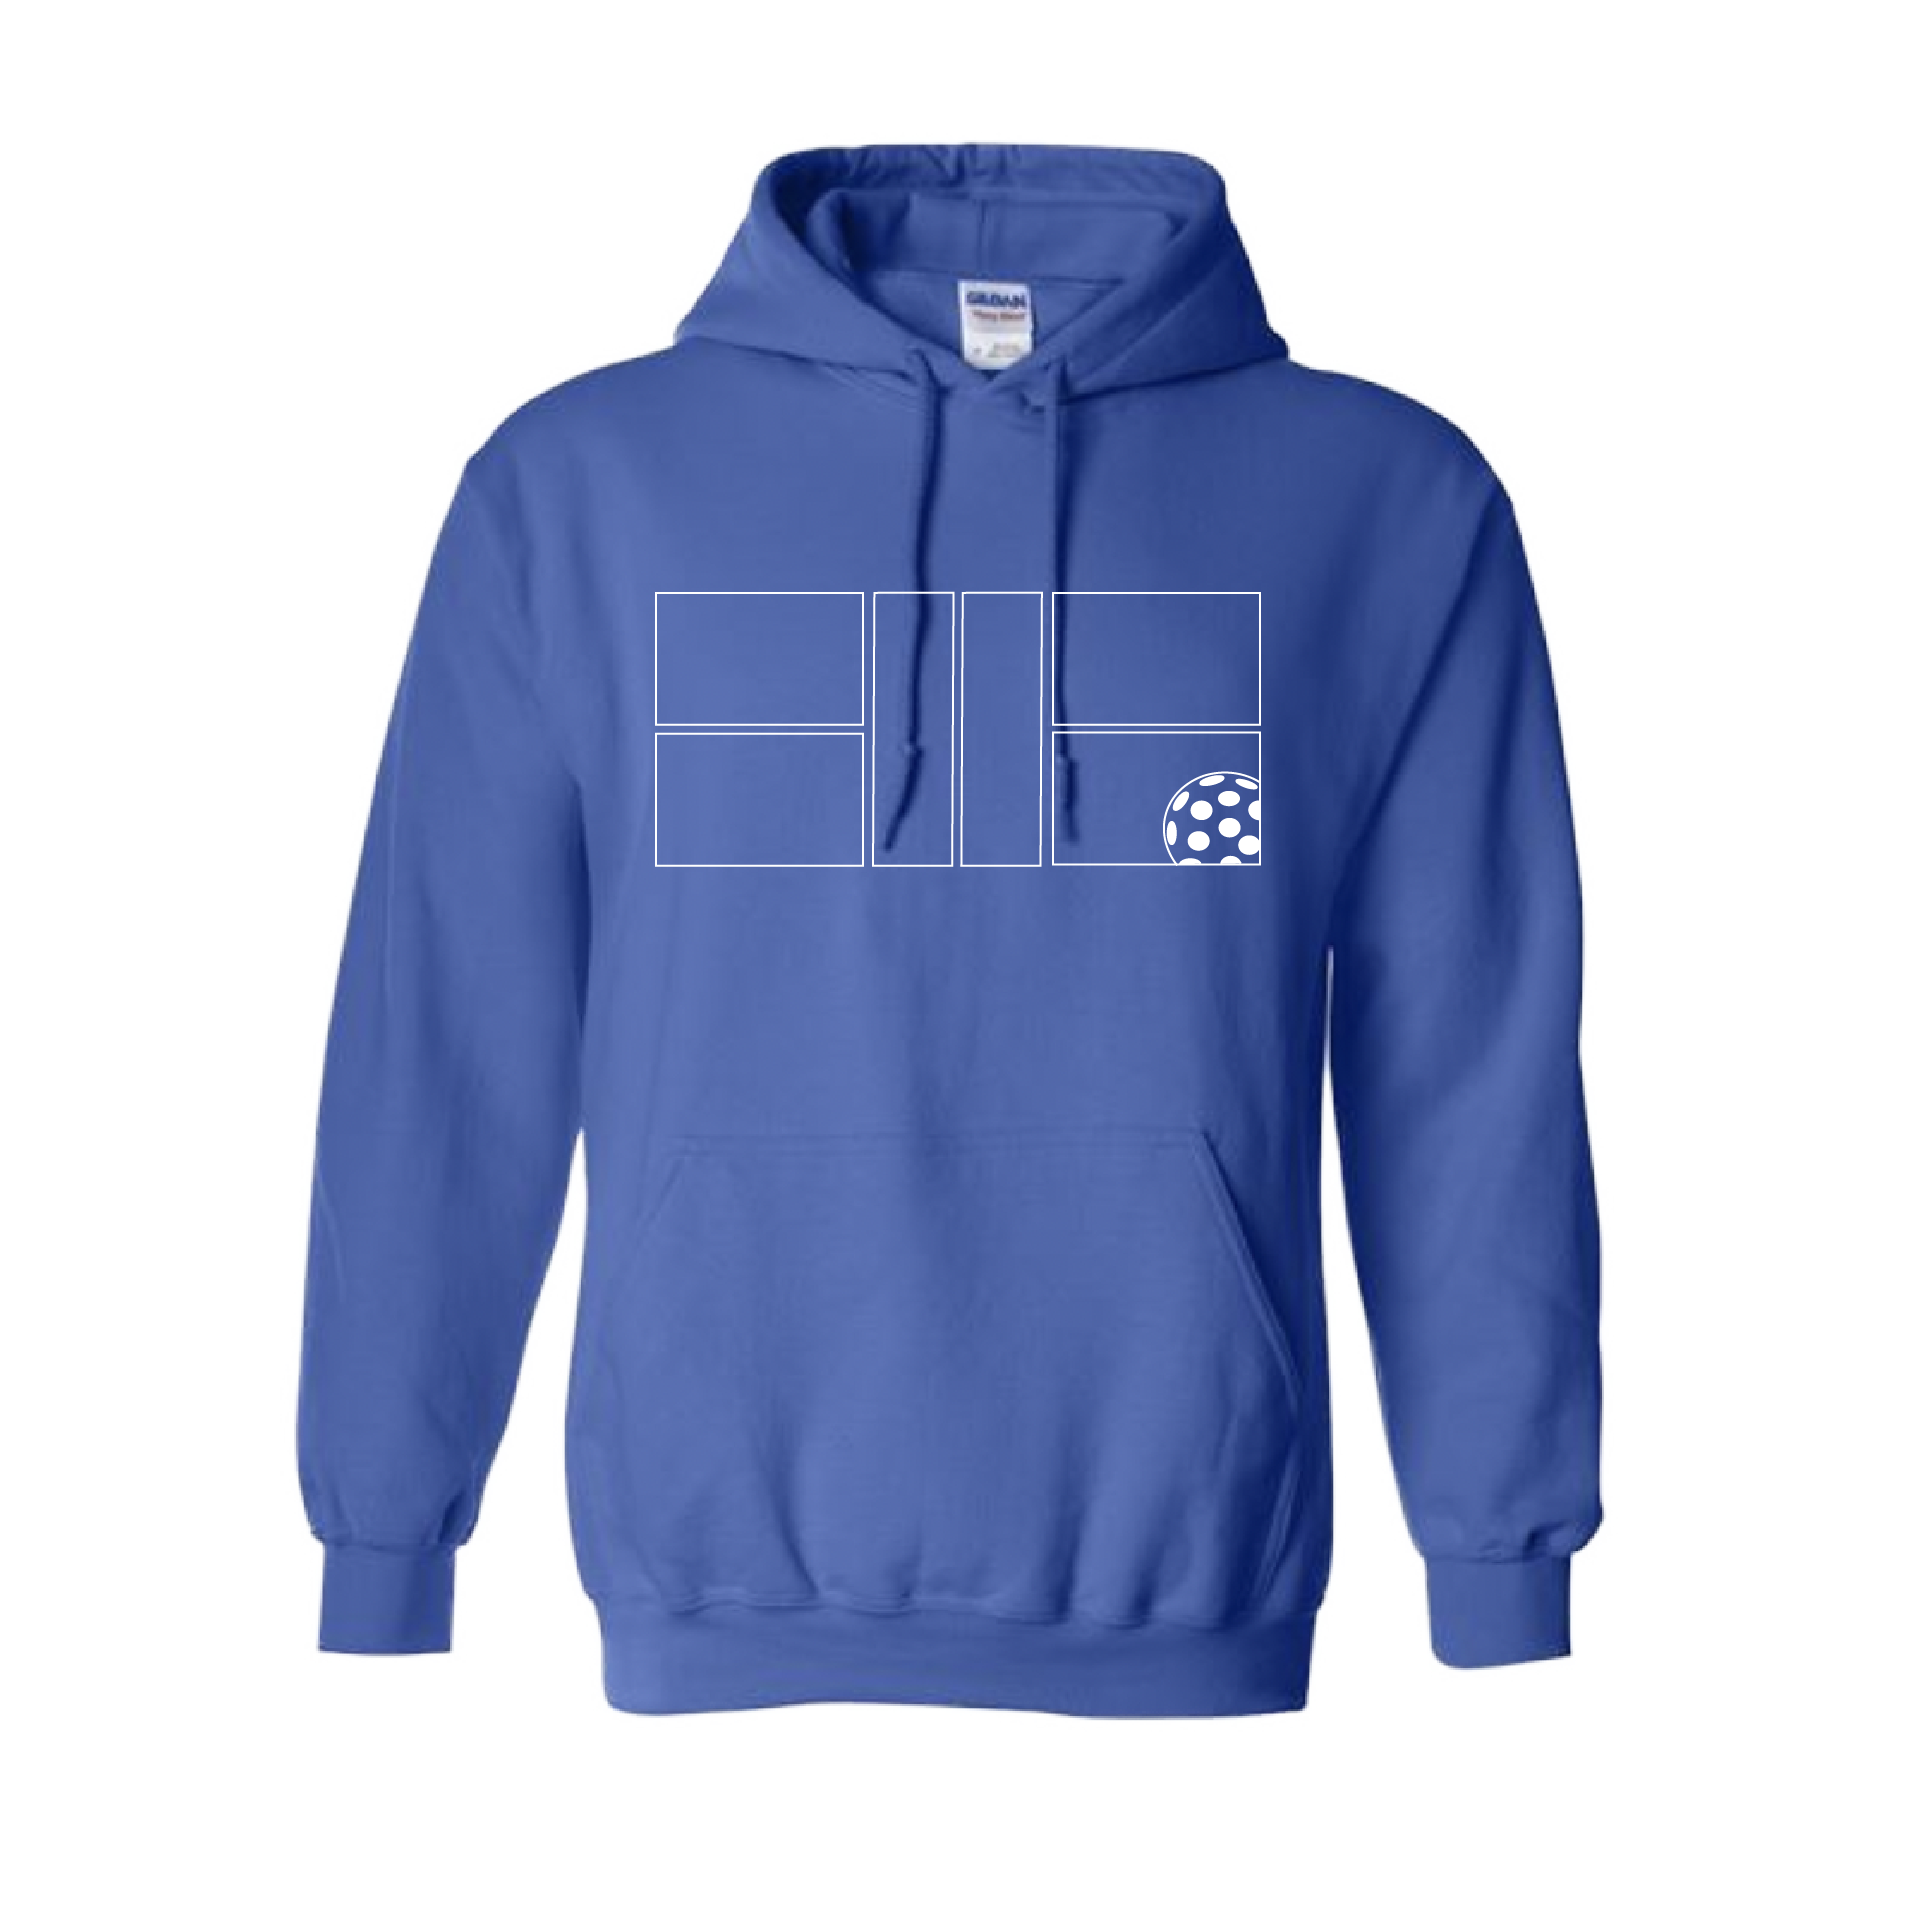 Pickleball Design: Pickleball Court with Pickleball  Unisex Hooded Sweatshirt: Moisture-wicking, double-lined hood, front pouch pocket.  This unisex hooded sweatshirt is ultra comfortable and soft. Stay warm on the Pickleball courts while being that hit with this one of kind design.